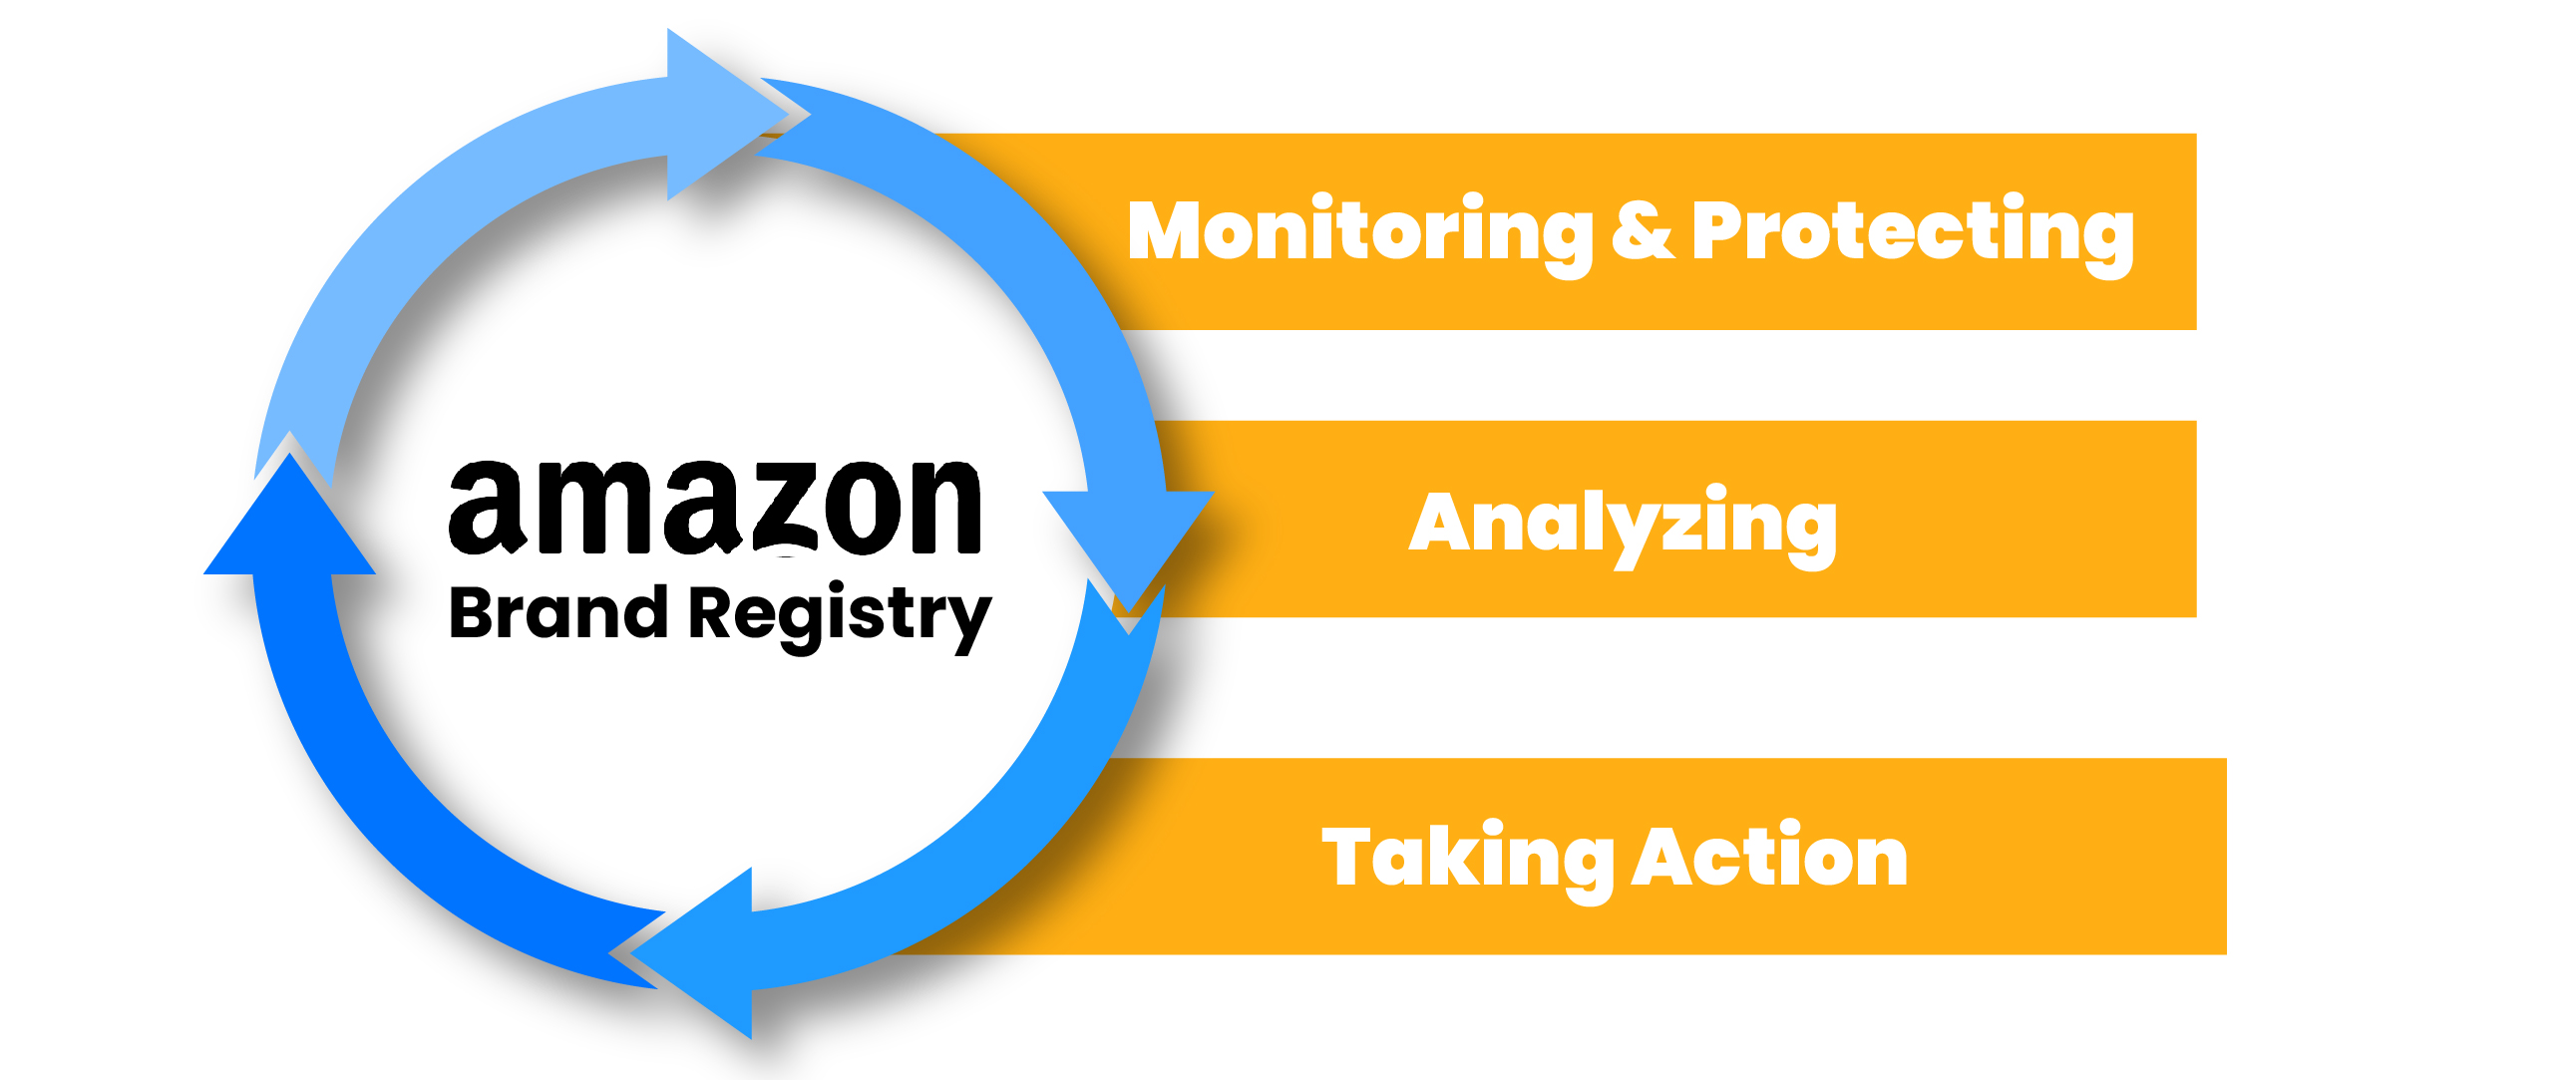 Here Is An Image For Showing The Continuous Cycle Of Monitoring, Analyzing, And Taking Action